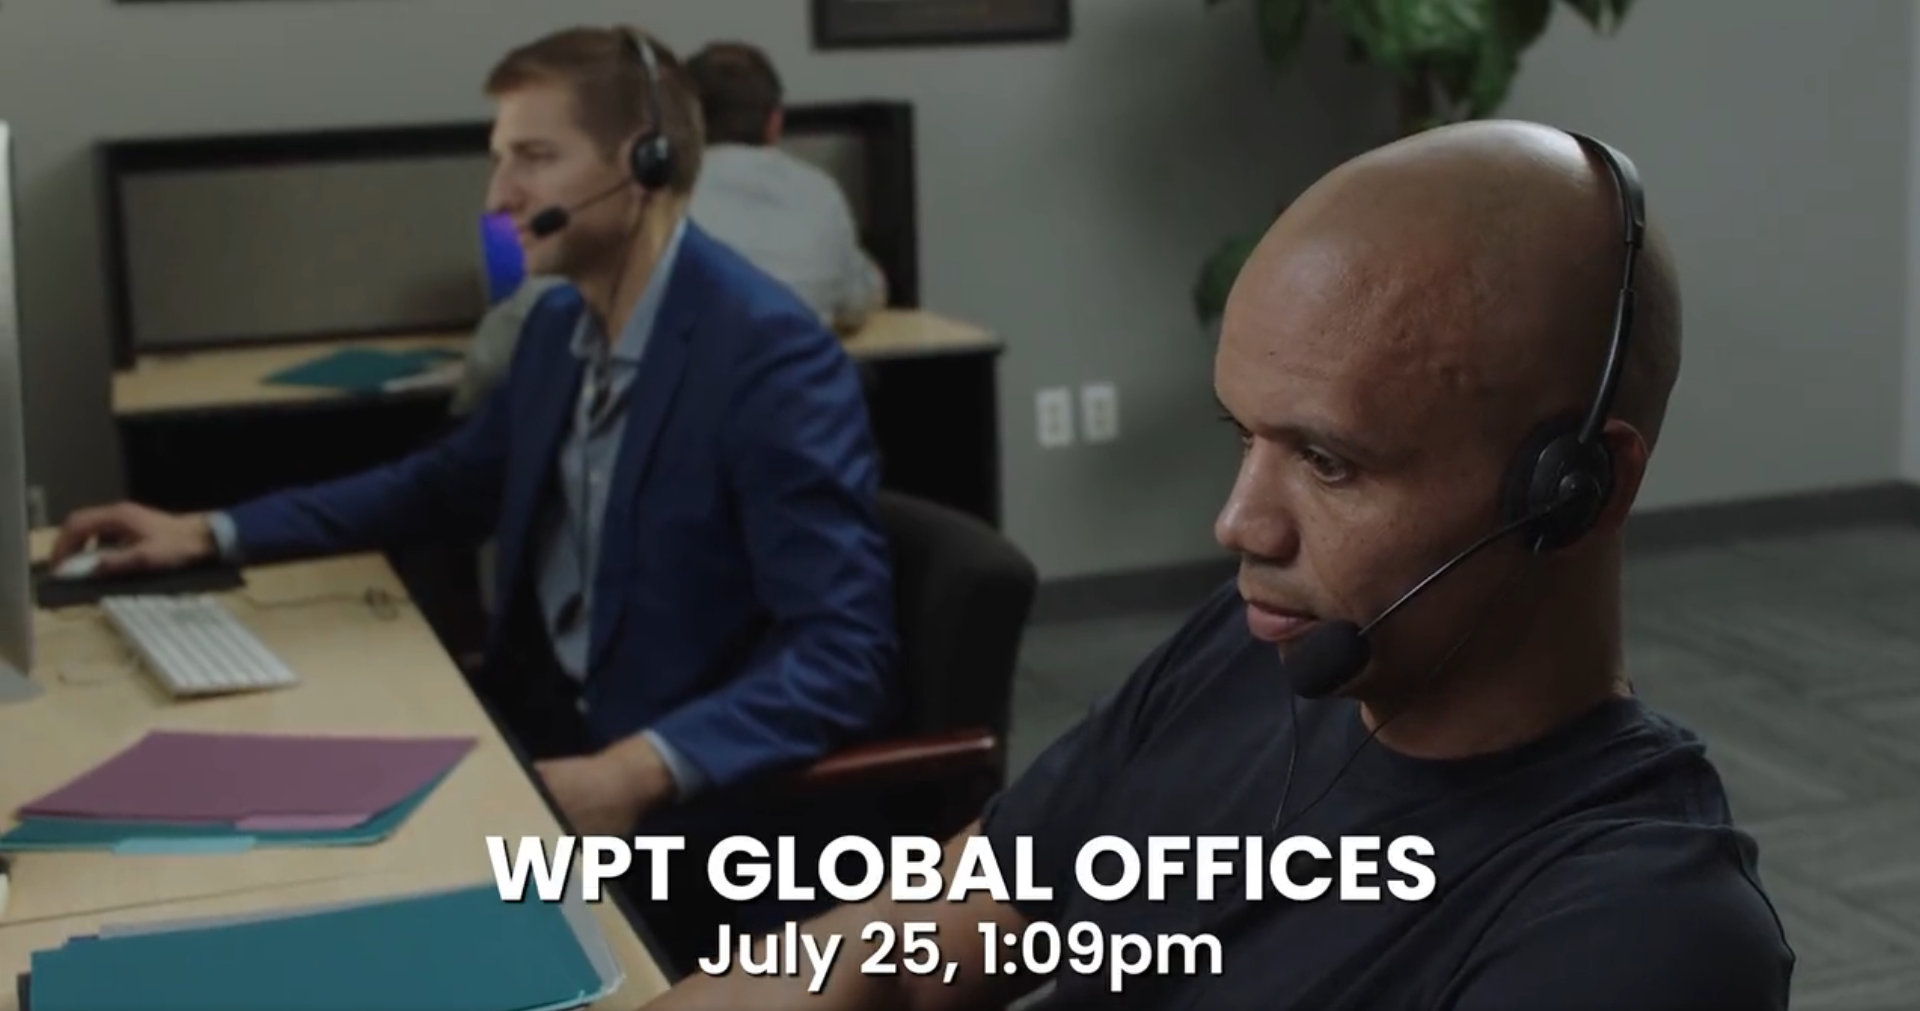 Phil Ivey Makes an Appearance in WPT Global Advertisement